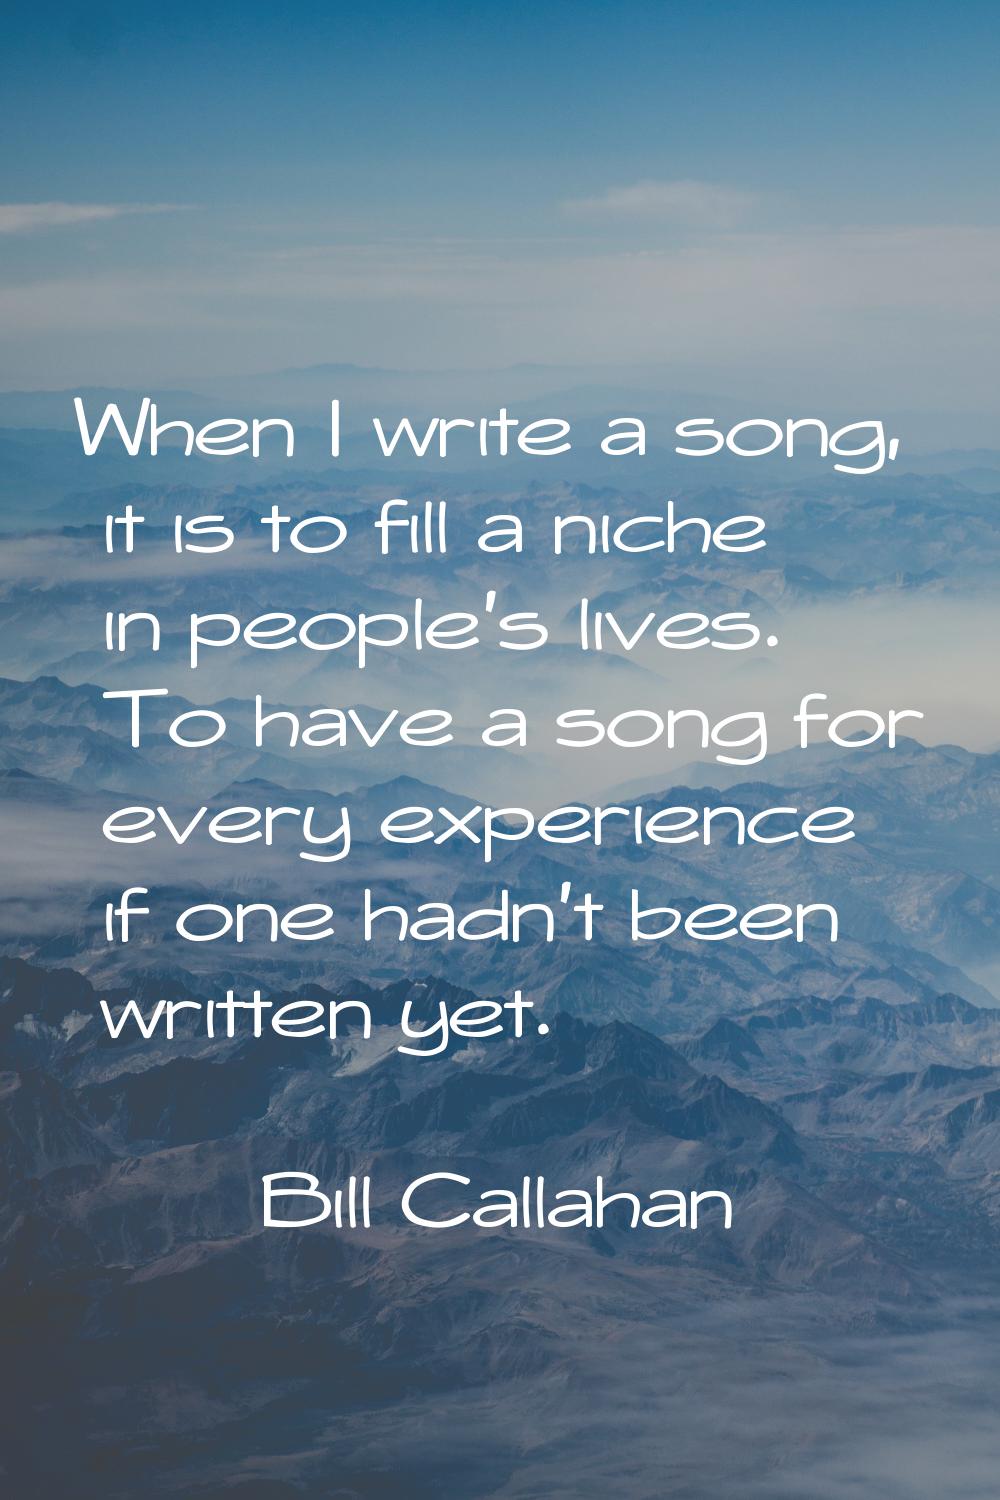 When I write a song, it is to fill a niche in people's lives. To have a song for every experience i